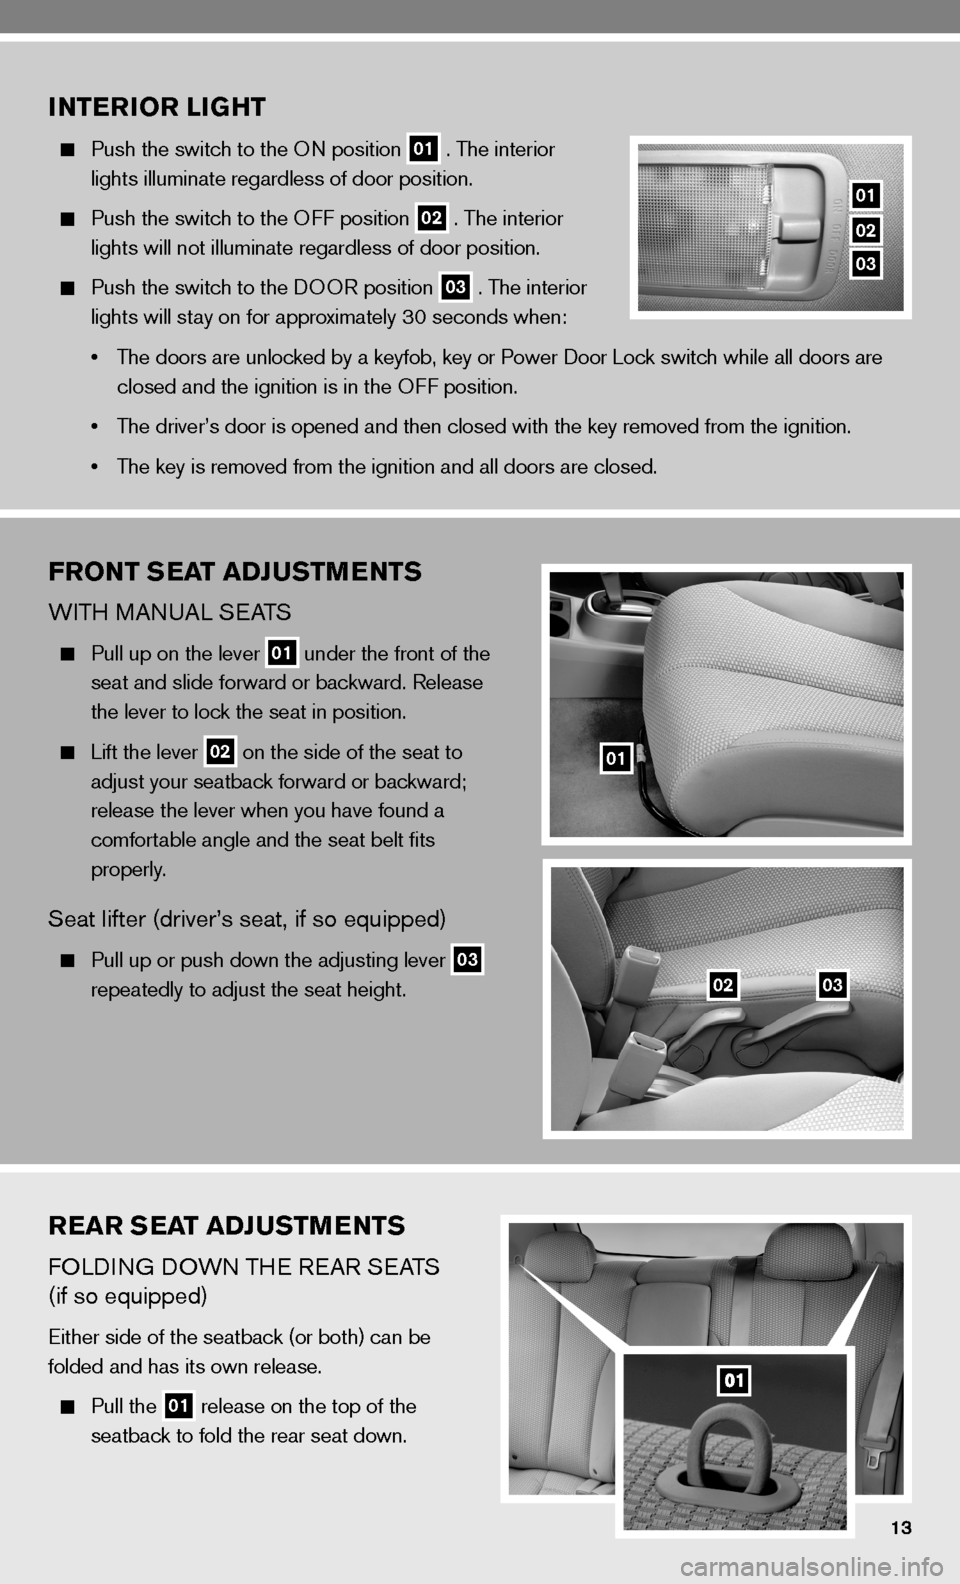 NISSAN VERSA HATCHBACK 2010 1.G Quick Reference Guide REAR SEAT ADJUSTMENTS
fOLdinG dOWn TH e ReAR S eATS  
(if so equipped)
either side of the seatback (or both) can be
folded and has its own release.
 
  Pull the 01 release on the top of the
    seatba